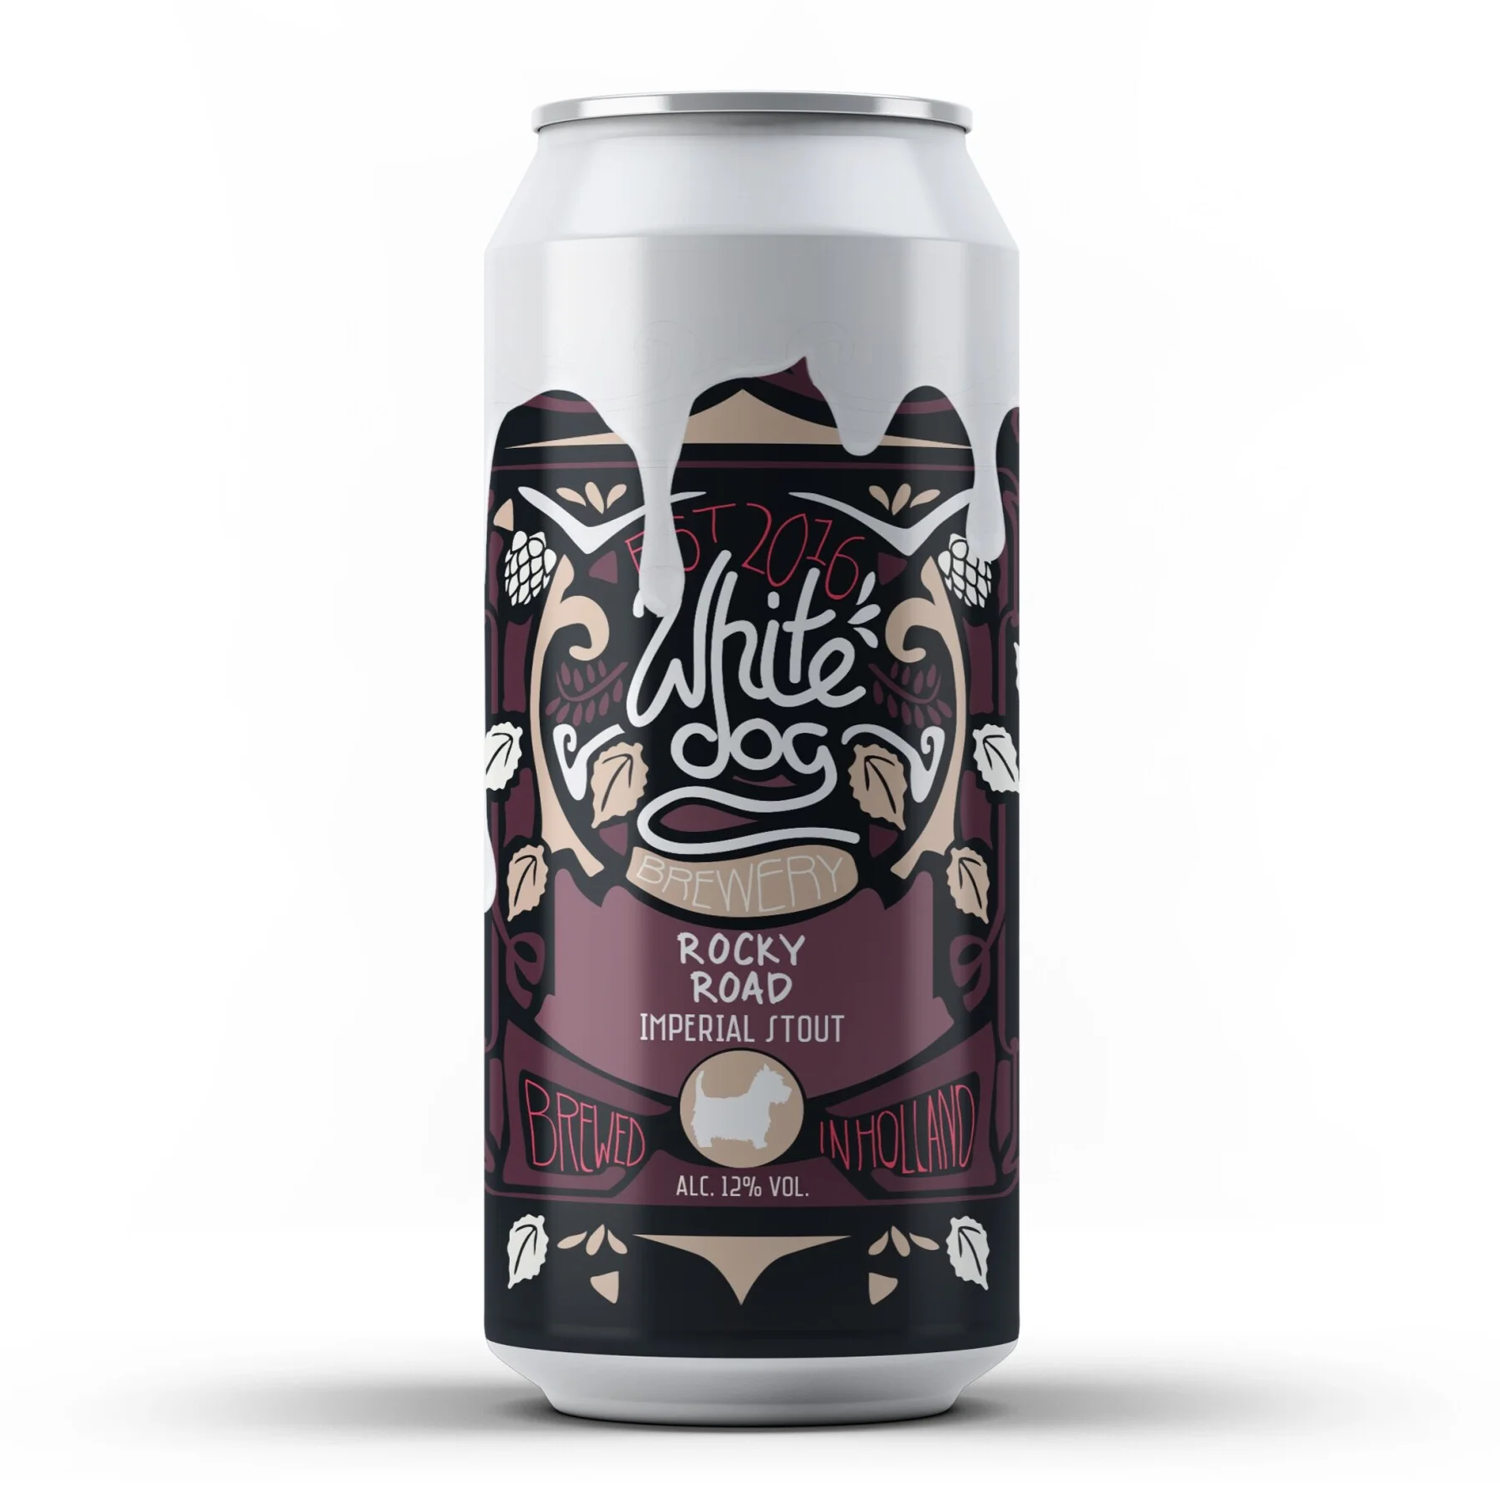 White Dog Rocky Road Imperial Stout